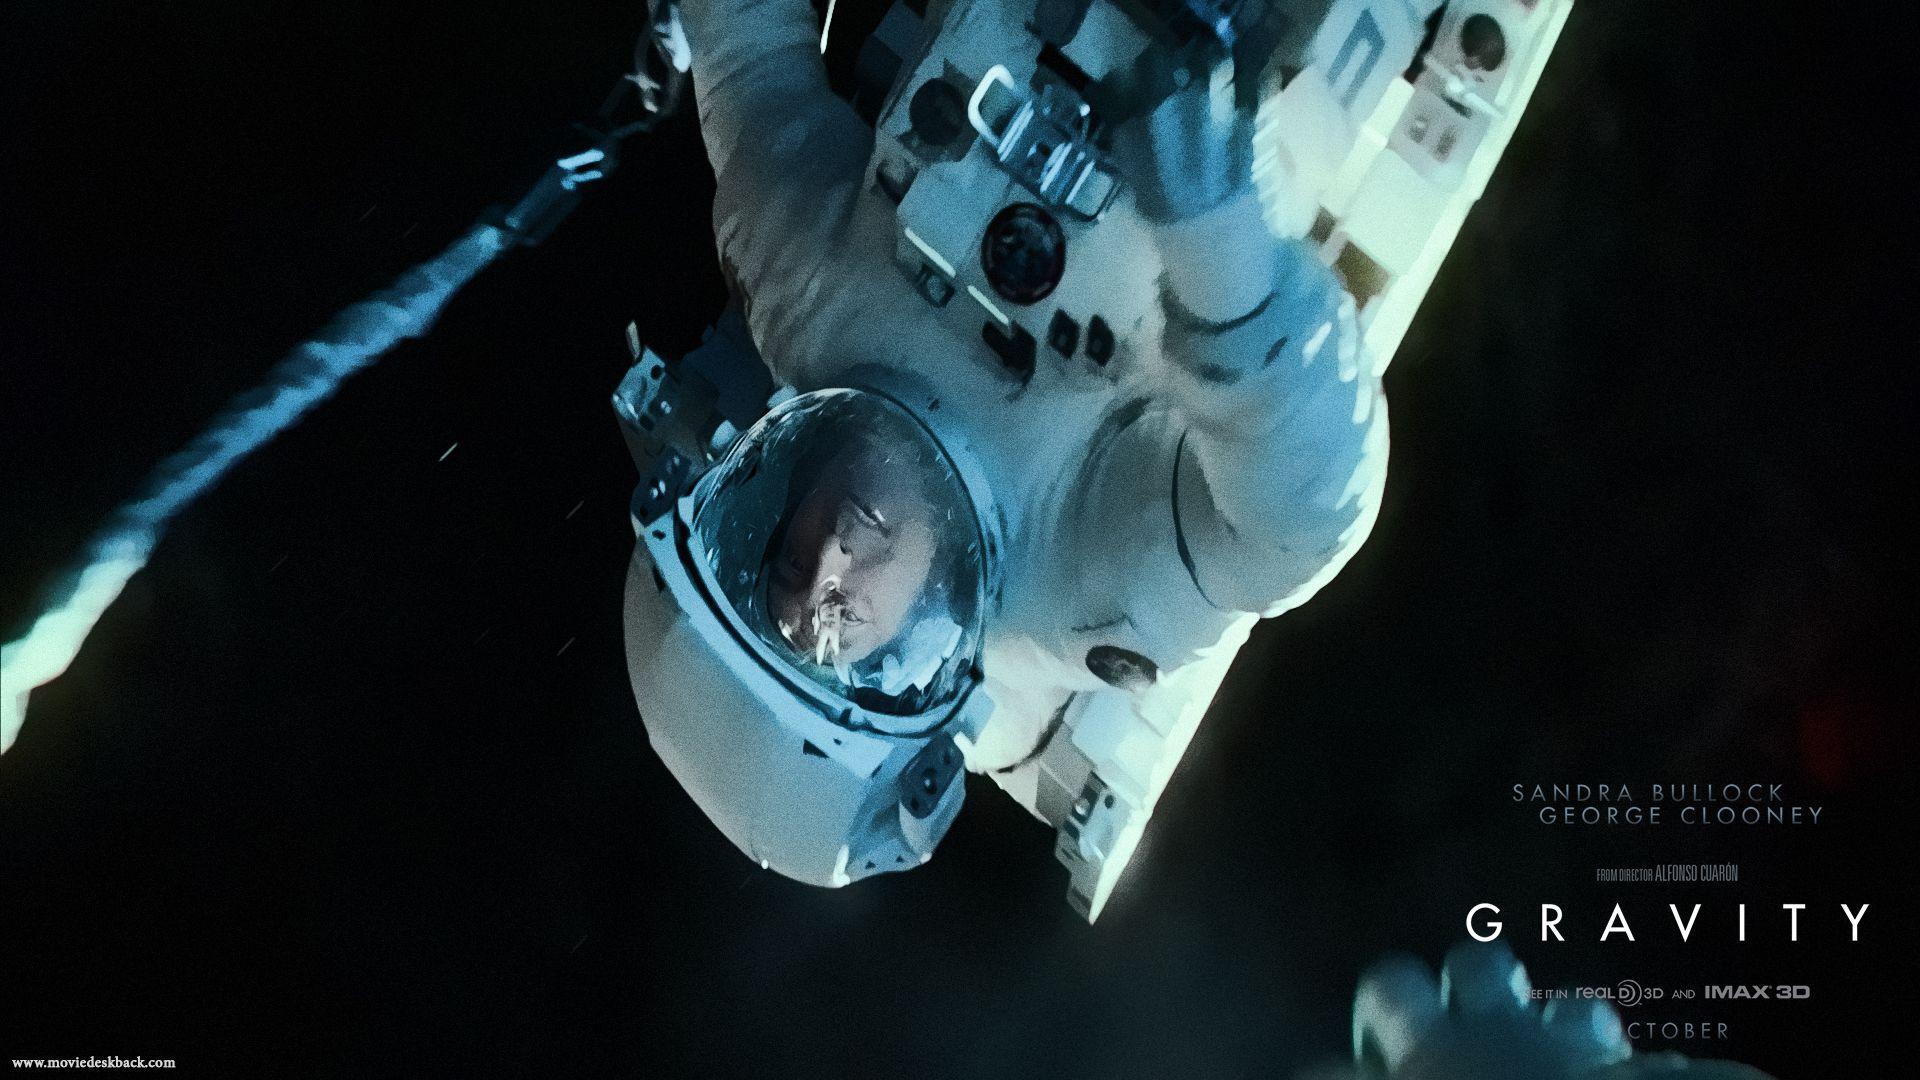 Is Gravity a science fiction movie?